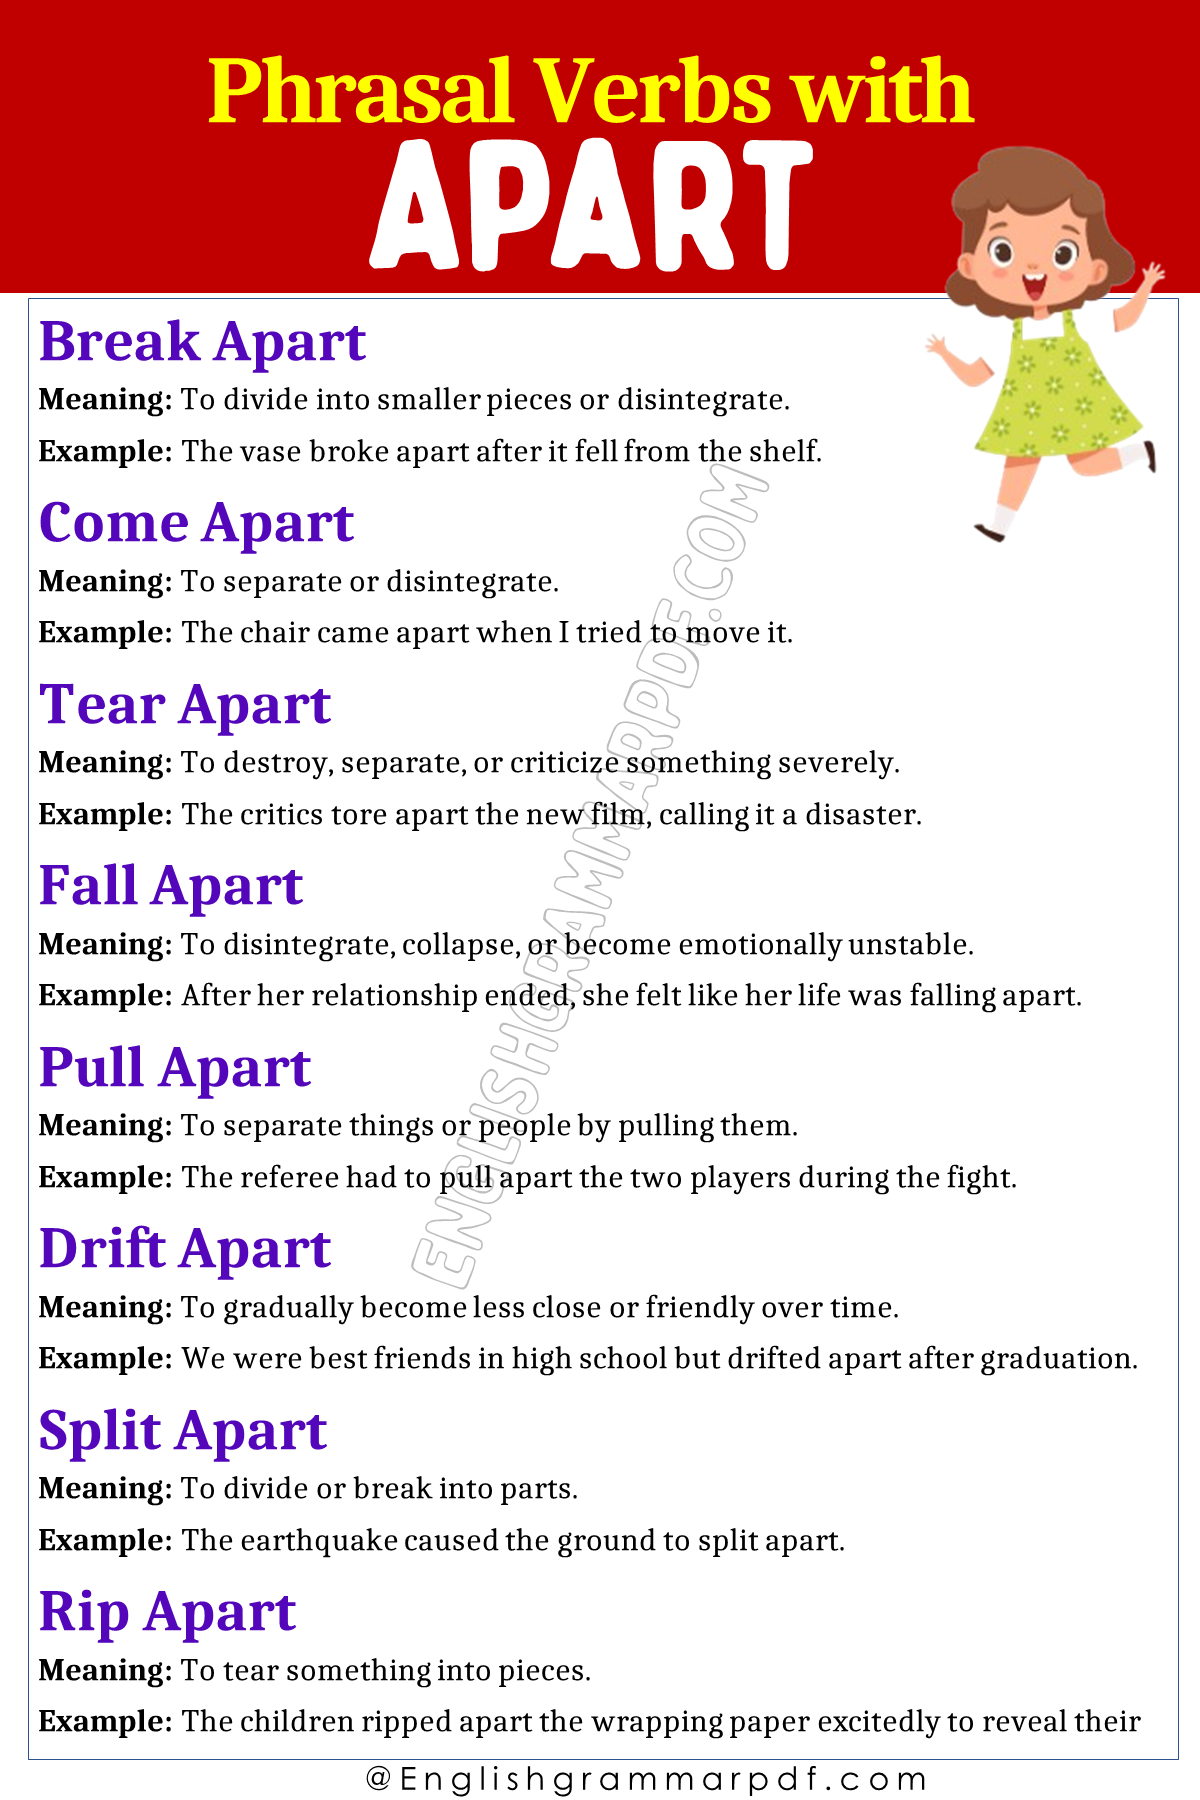 Phrasal Verbs with Apart in english